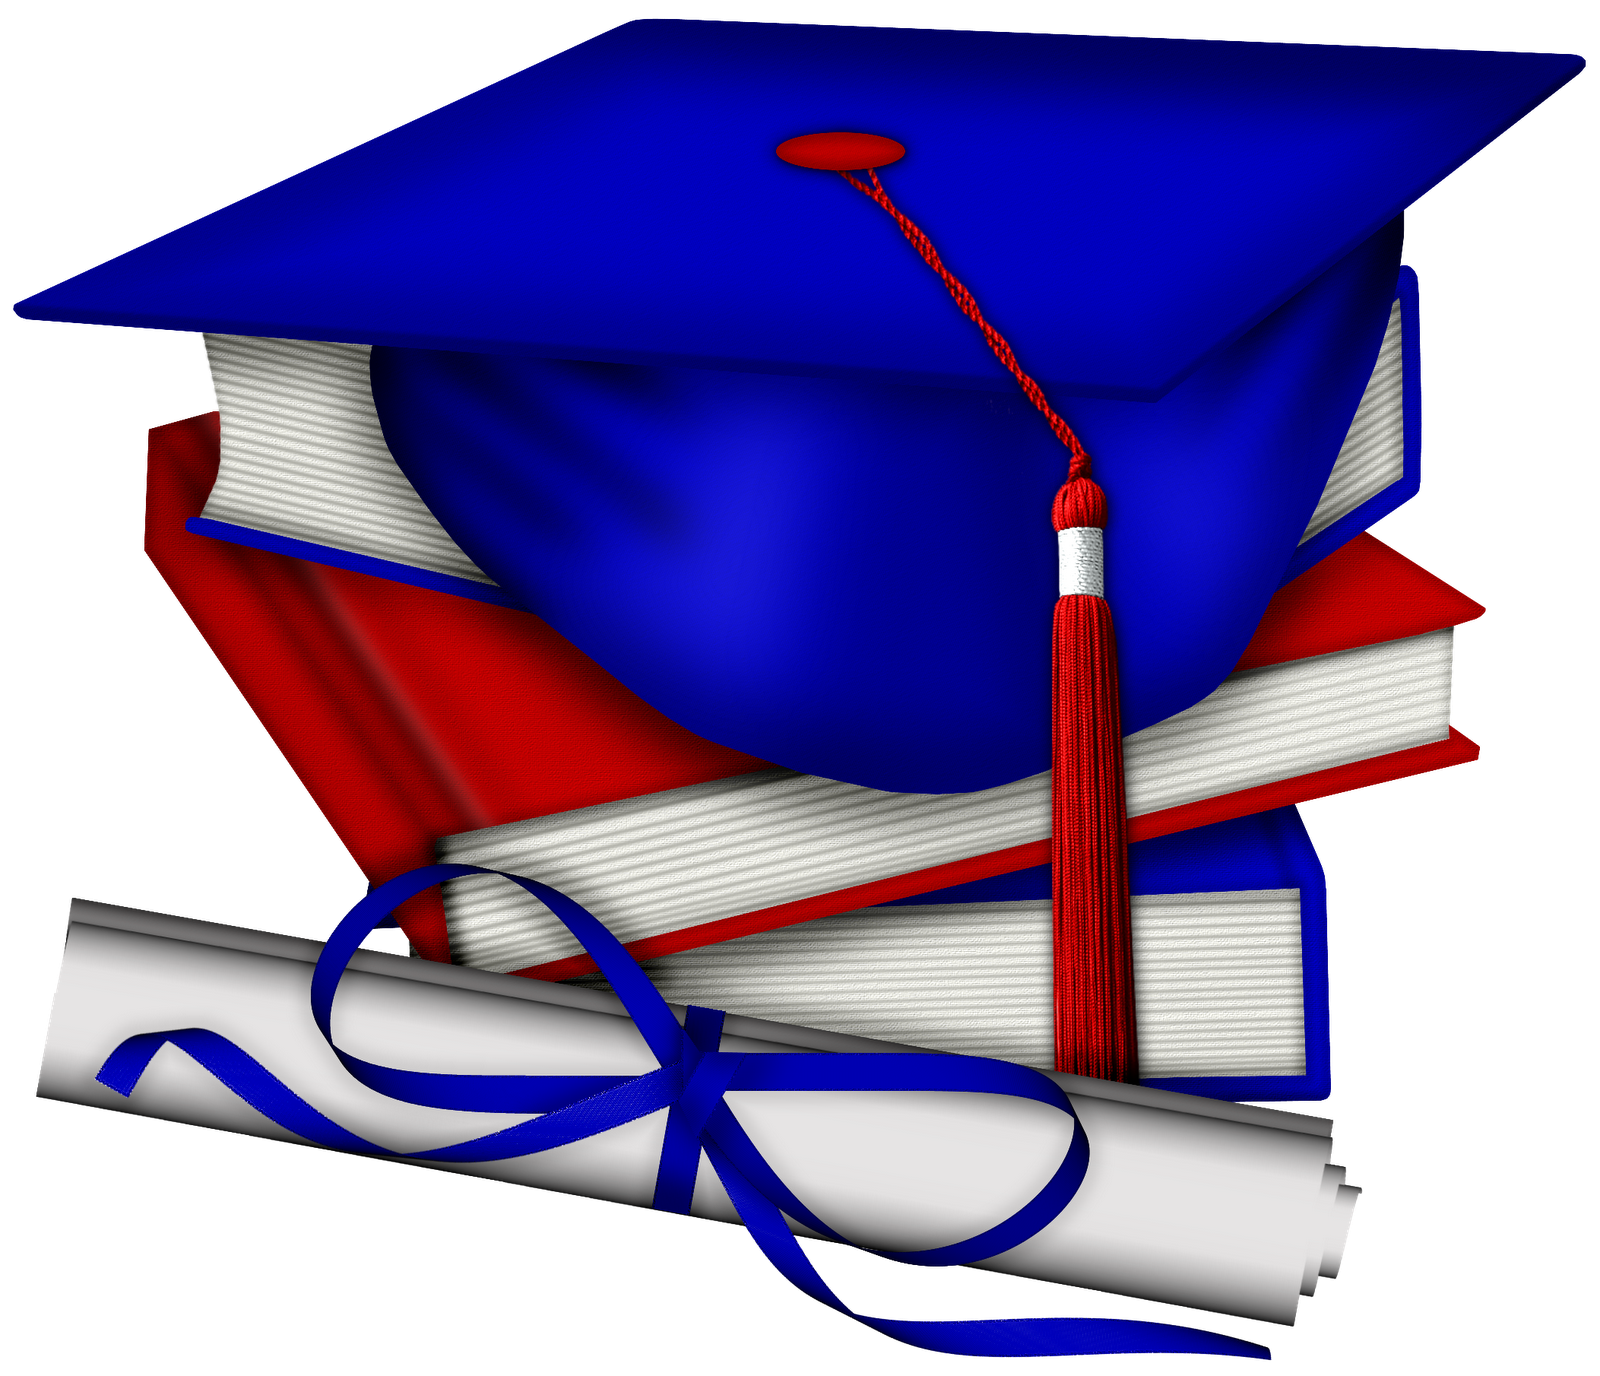 Graduation Border Clipart | Clipart library - Free Clipart Images